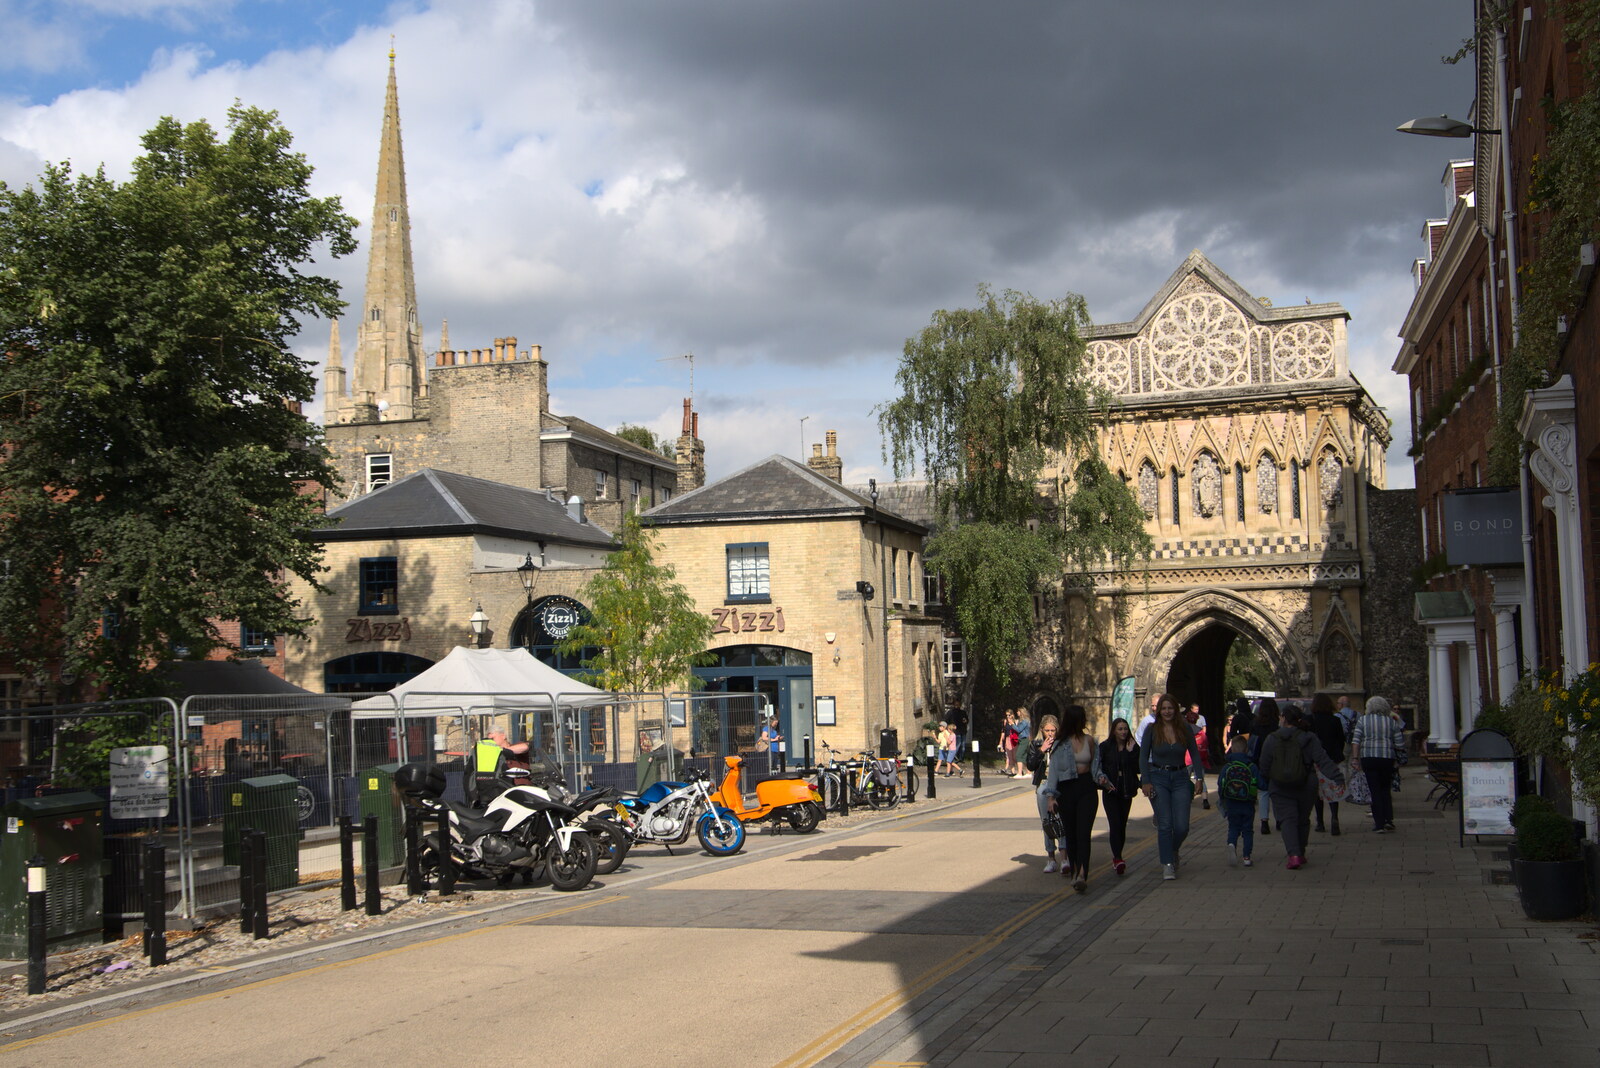 The South Gate and Tombland from Dippy and the City Dinosaur Trail, Norwich, Norfolk - 19th August 2021